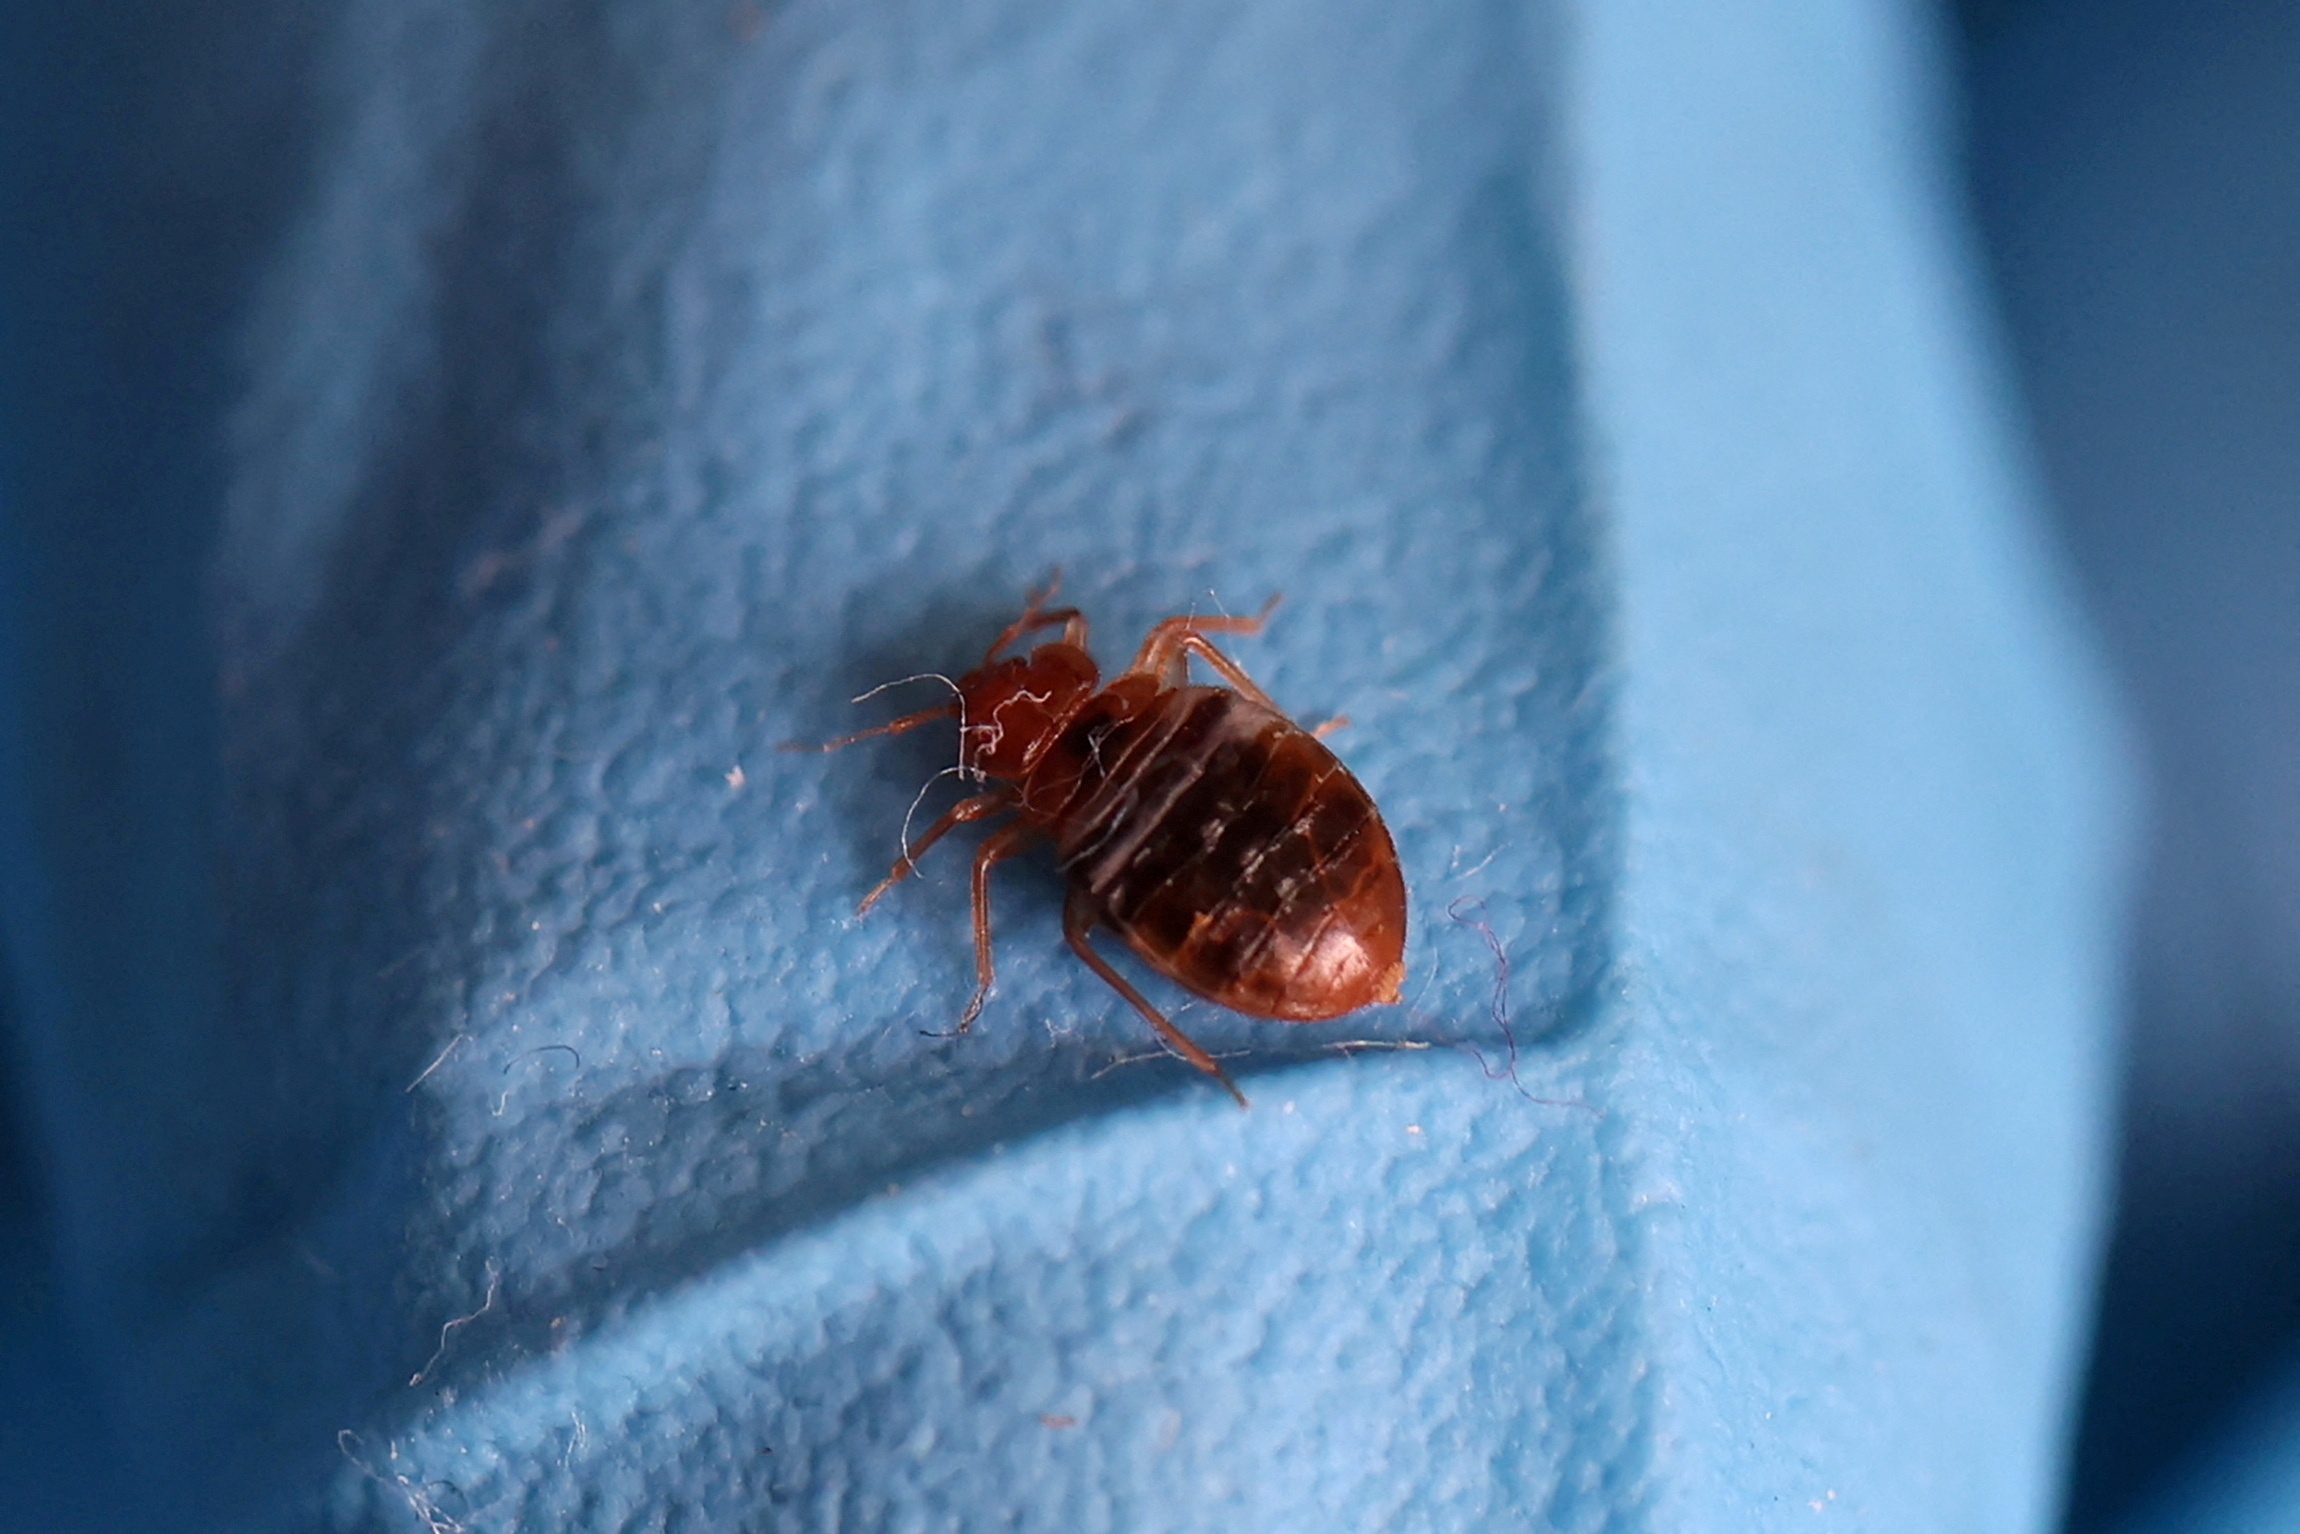 FILE PHOTO: A bed bug is seen on a glove of a biocide technician from the company Hygiene Premium who treats an apartment against bed bugs in L'Hay-les-Roses, near Paris, France, September 29, 2023.